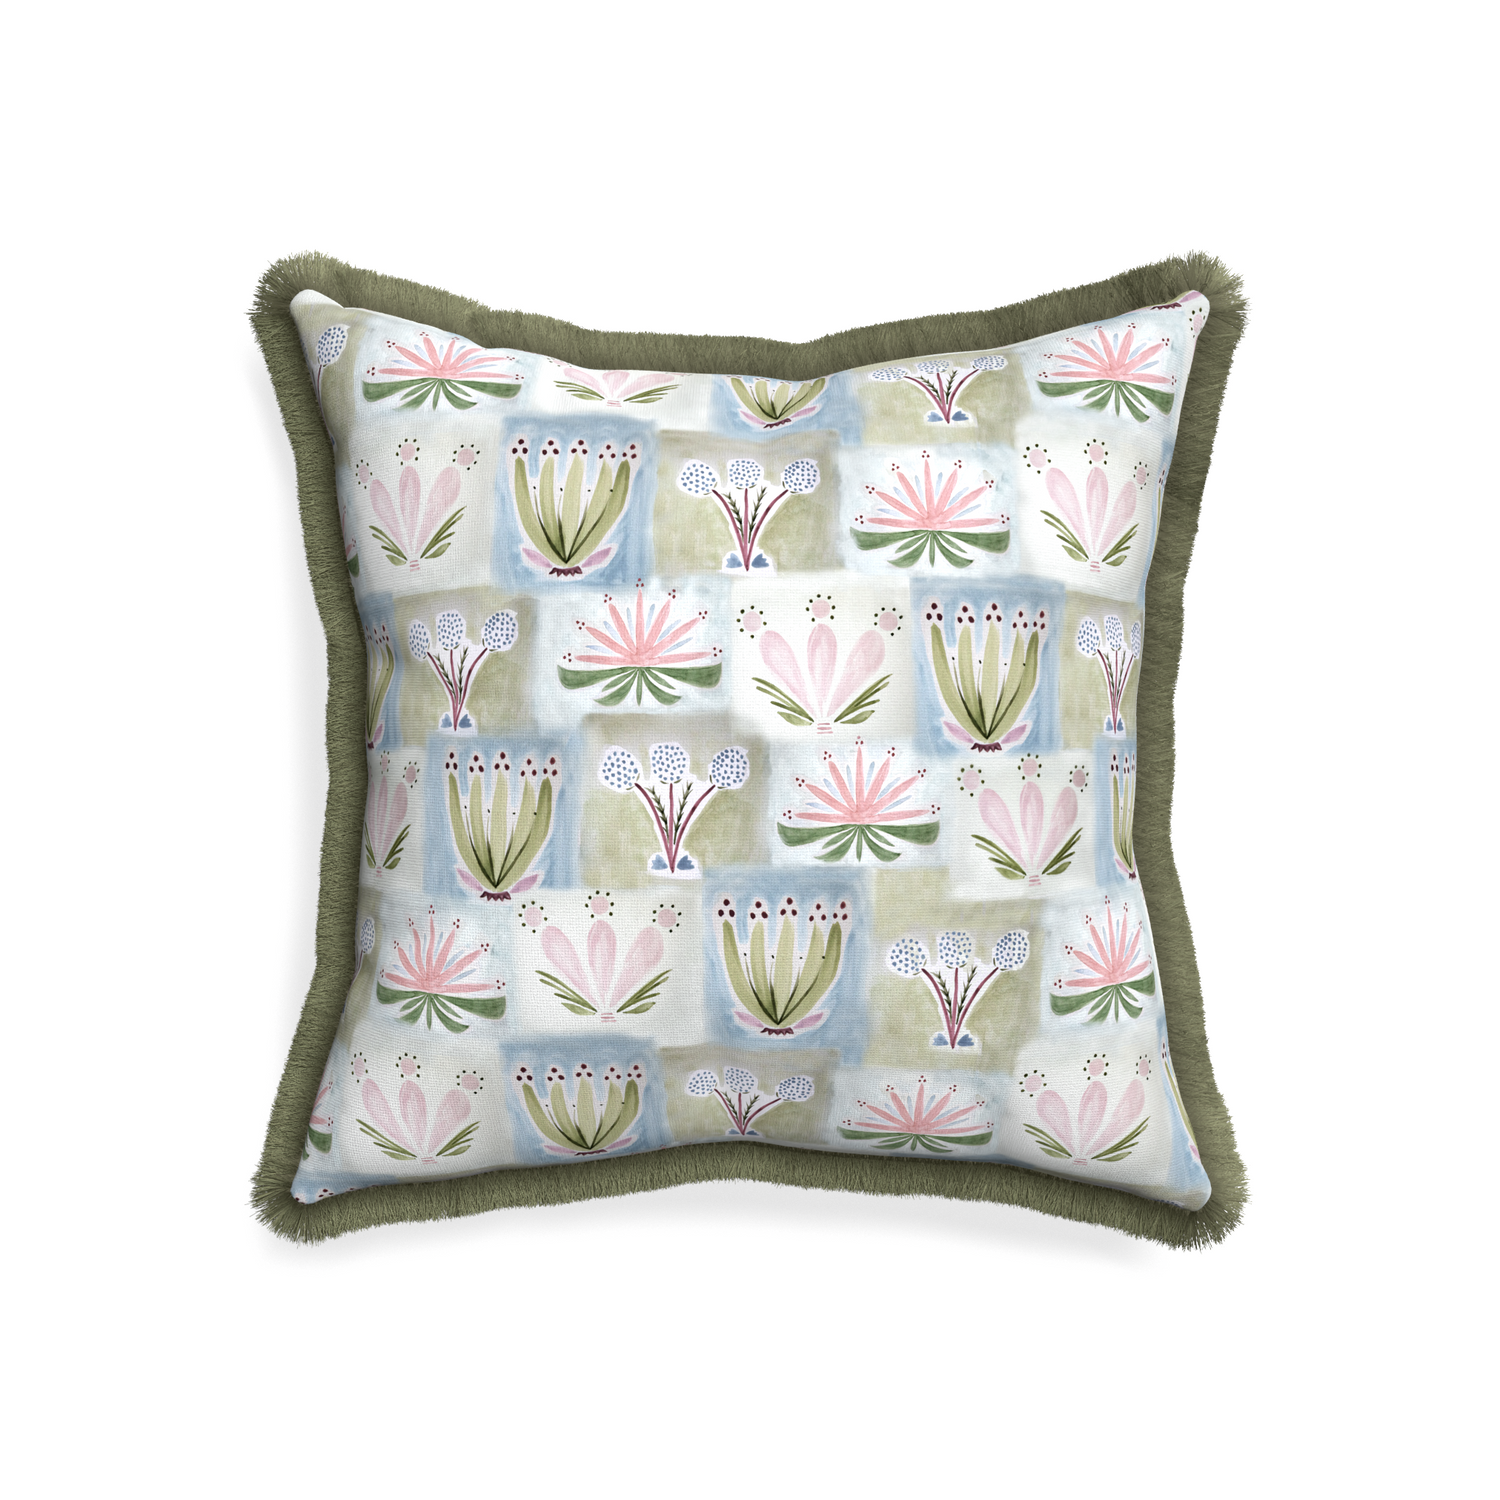 20-square harper custom hand-painted floralpillow with sage fringe on white background